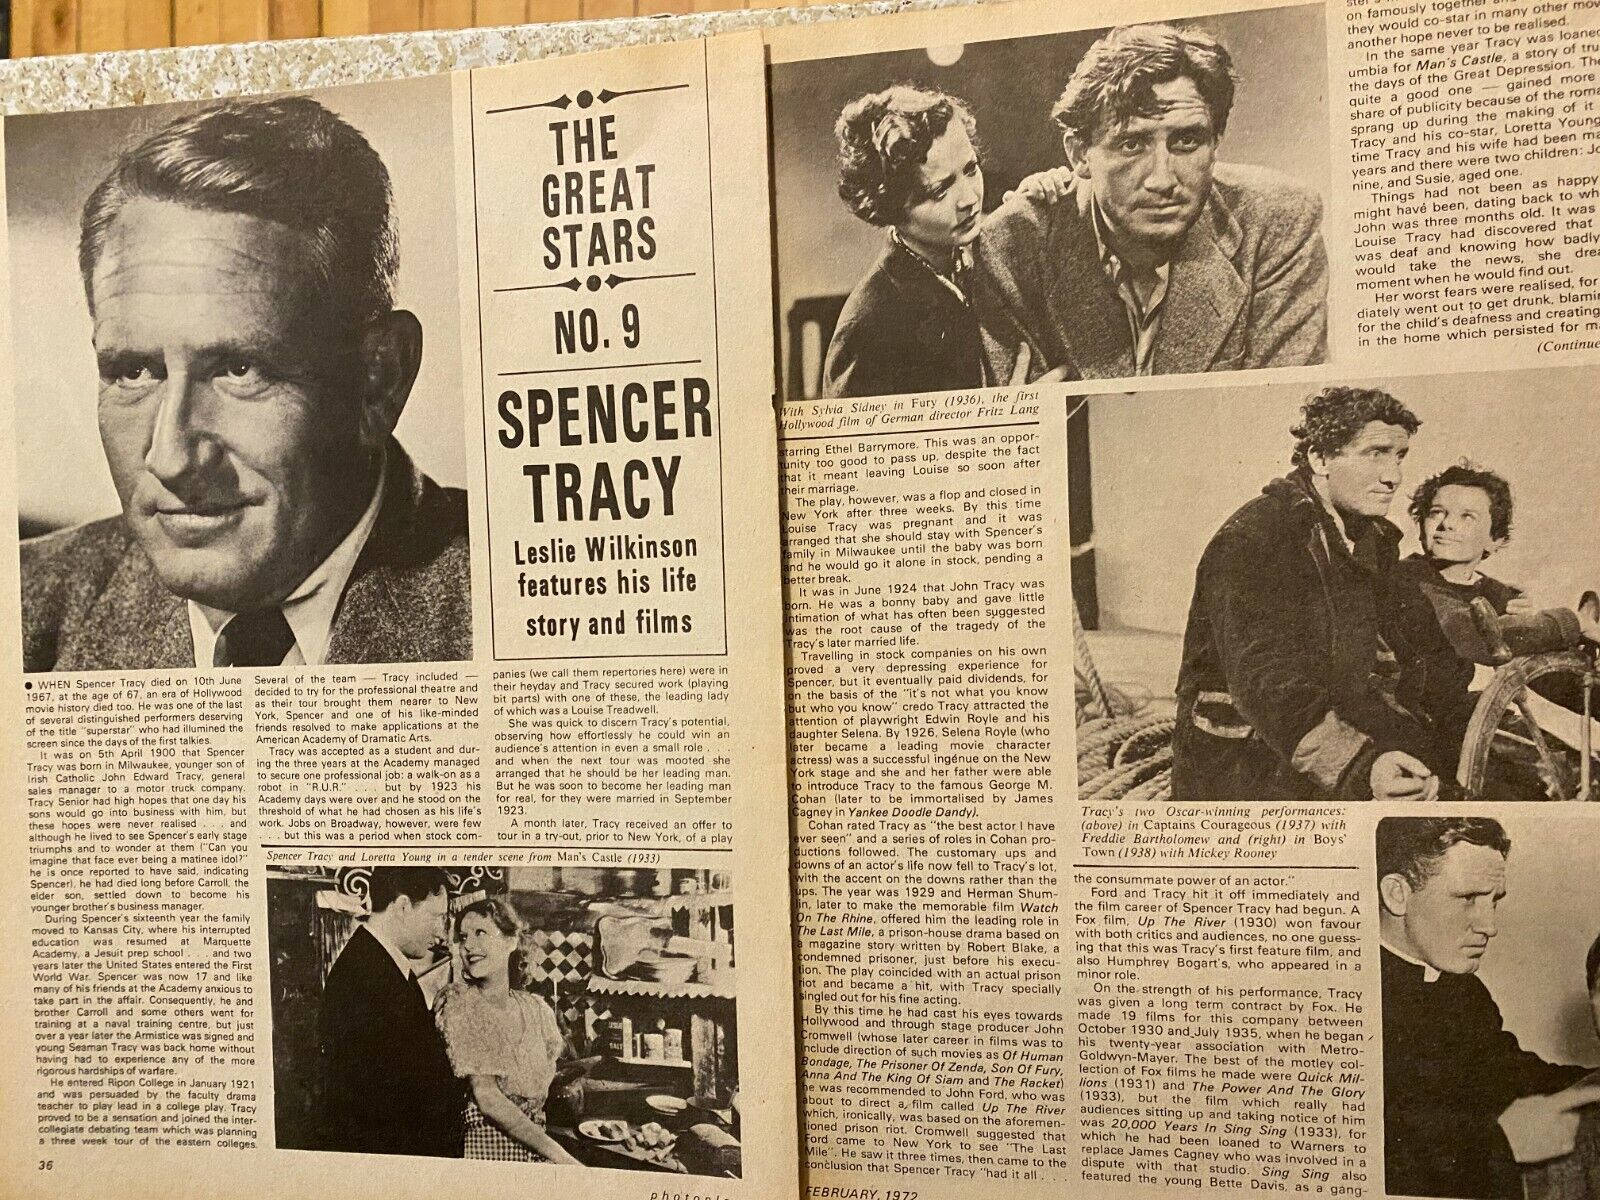 Spencer Tracy The Great Stars No. 9 Wallpaper